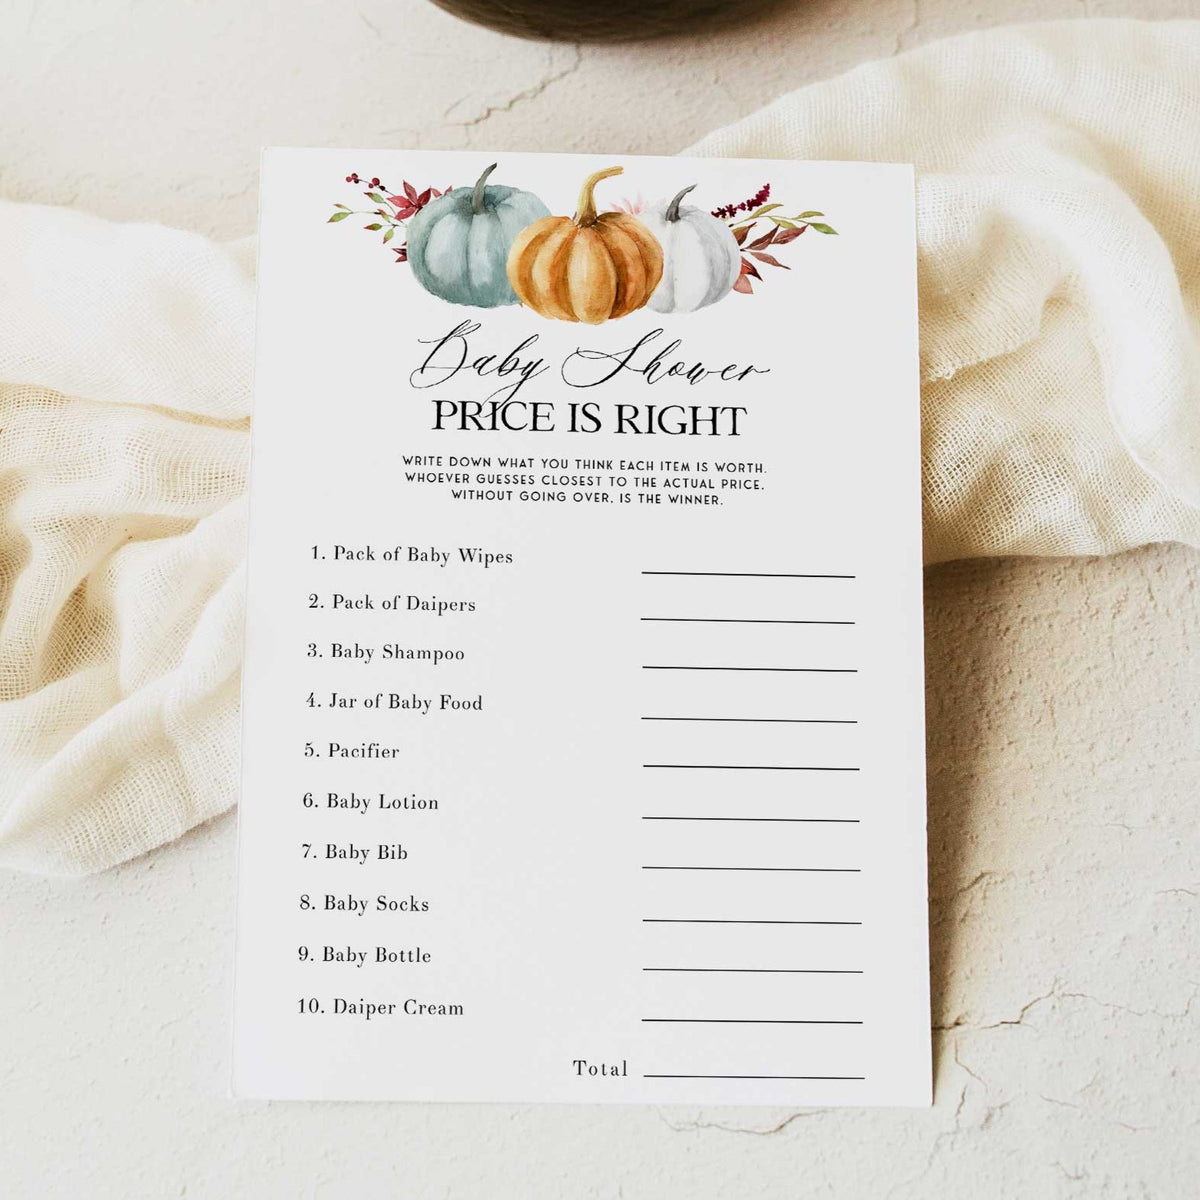 Fully editable and printable baby shower price is right game with a fall pumpkin design. Perfect for a Fall Pumpkin baby shower themed party